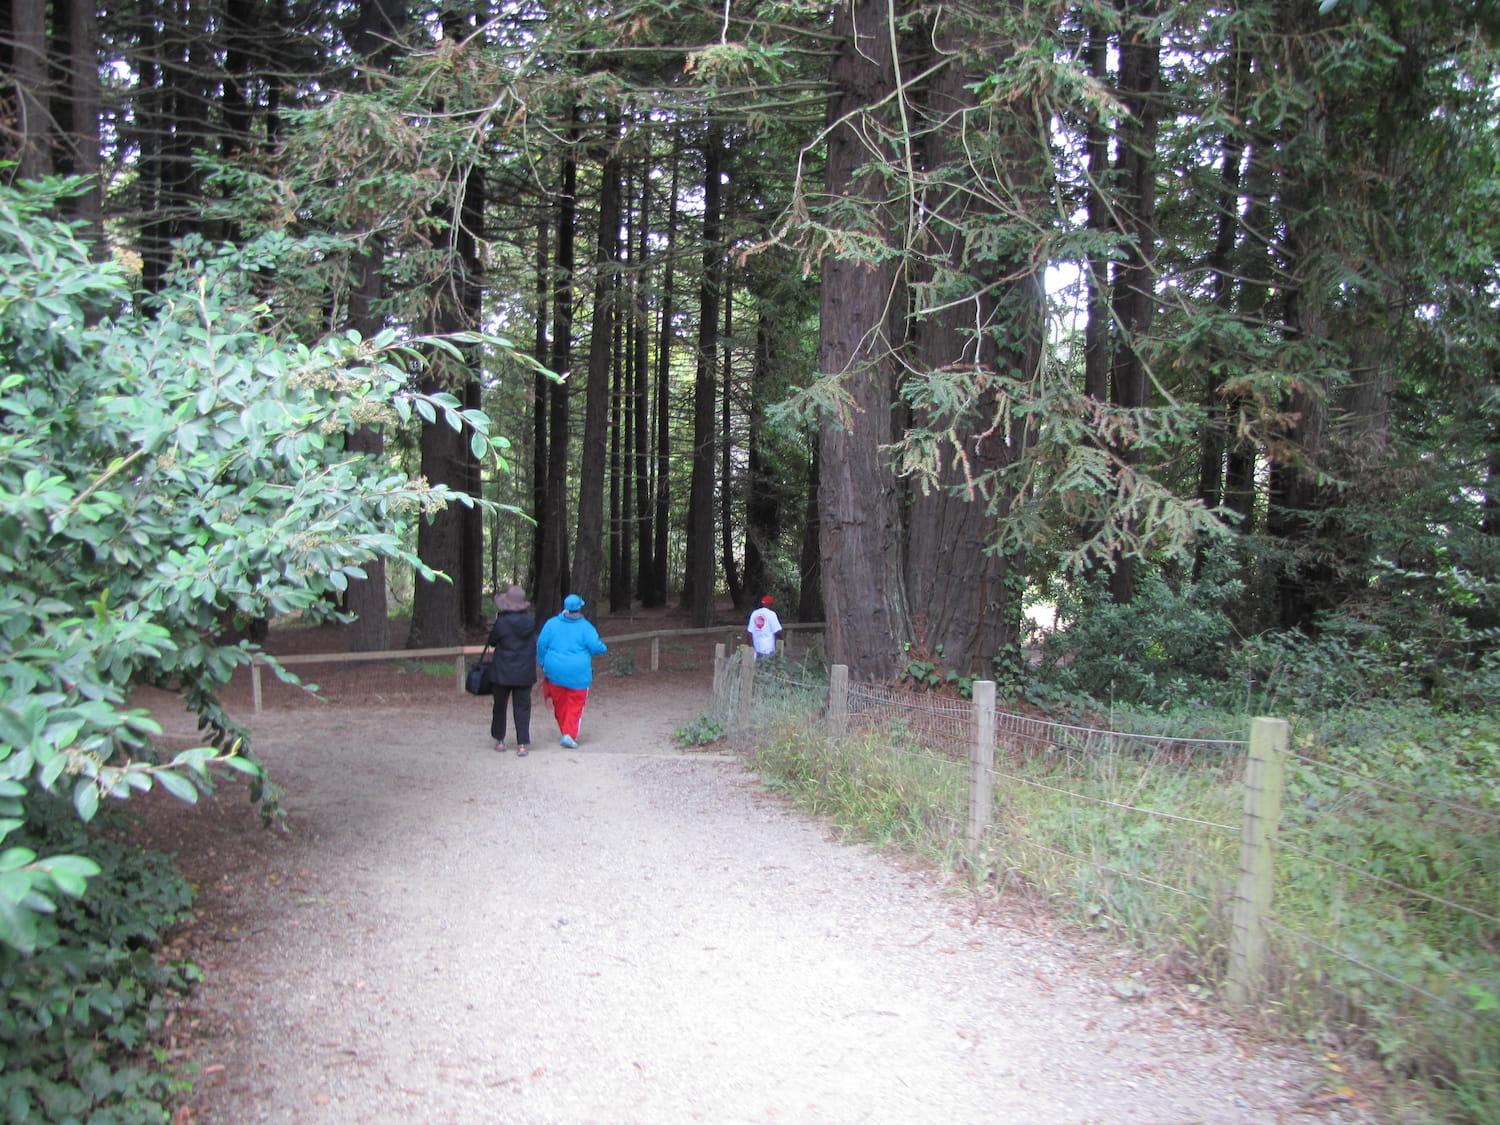 Two people walking through the Redwoods on the Ecology Trail.